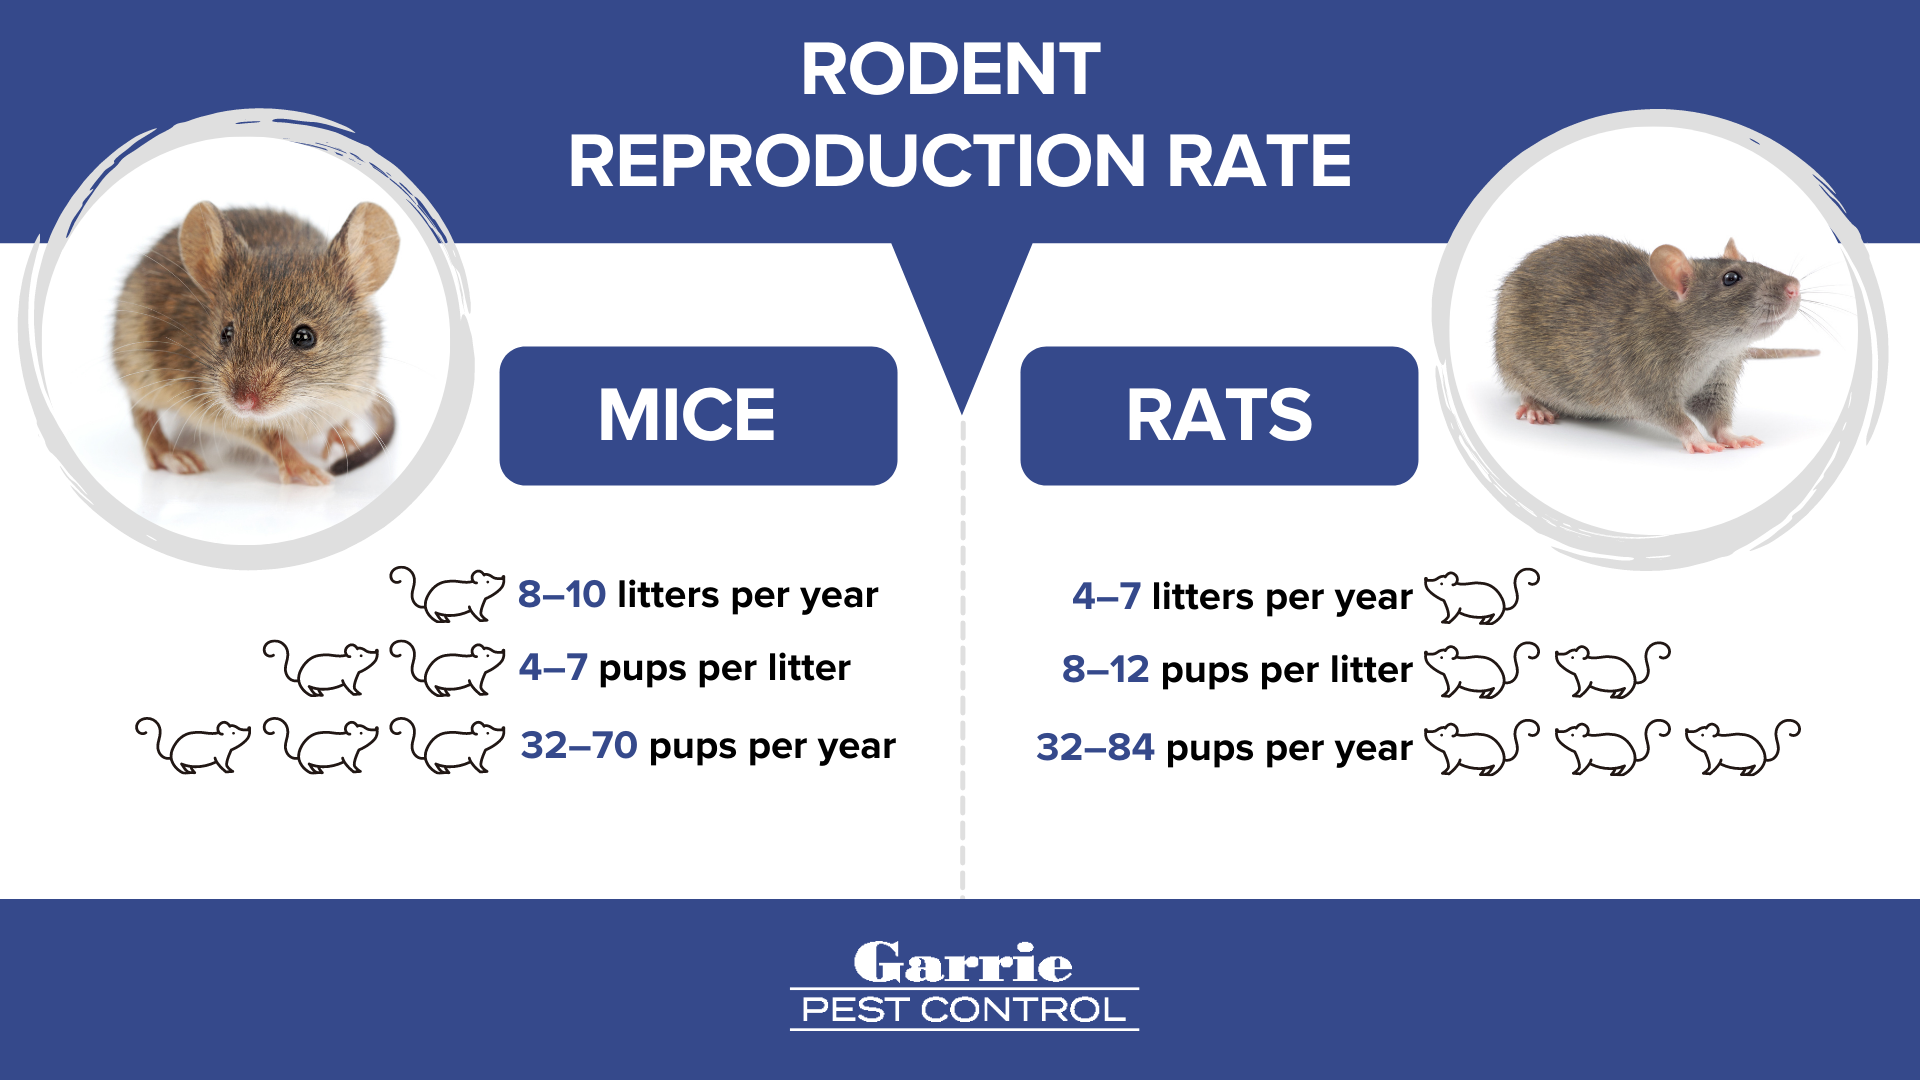 Rodent reproduction infographic - Garrie Pest Control in Peekskill NY